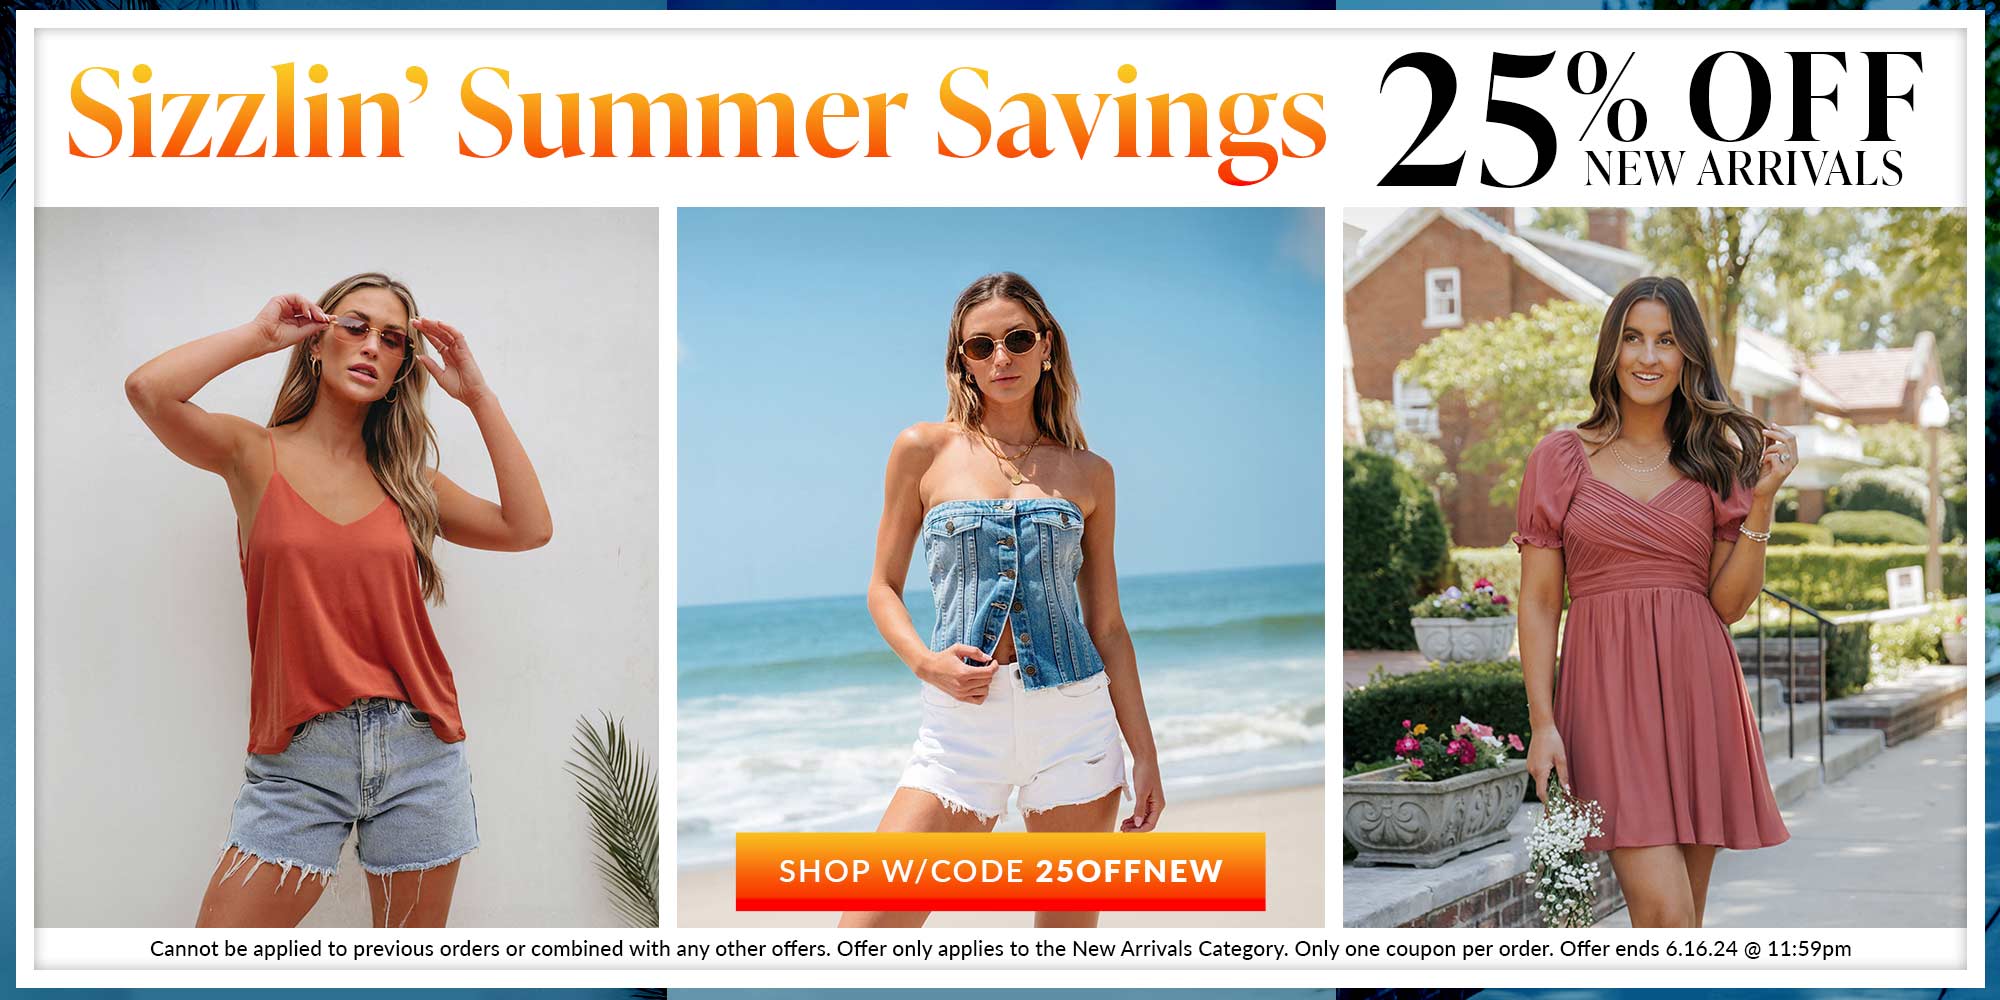 sizzlin-summer-savings-25-percent-off-new-arrivals-shop-with-code-25OFFNEW Cannot be applied to previous orders or combined with any other offers. Offer only applies to the New Arrivals Category. Only one coupon per order. Offer ends 6.16.24 @ 11:59pm ET.